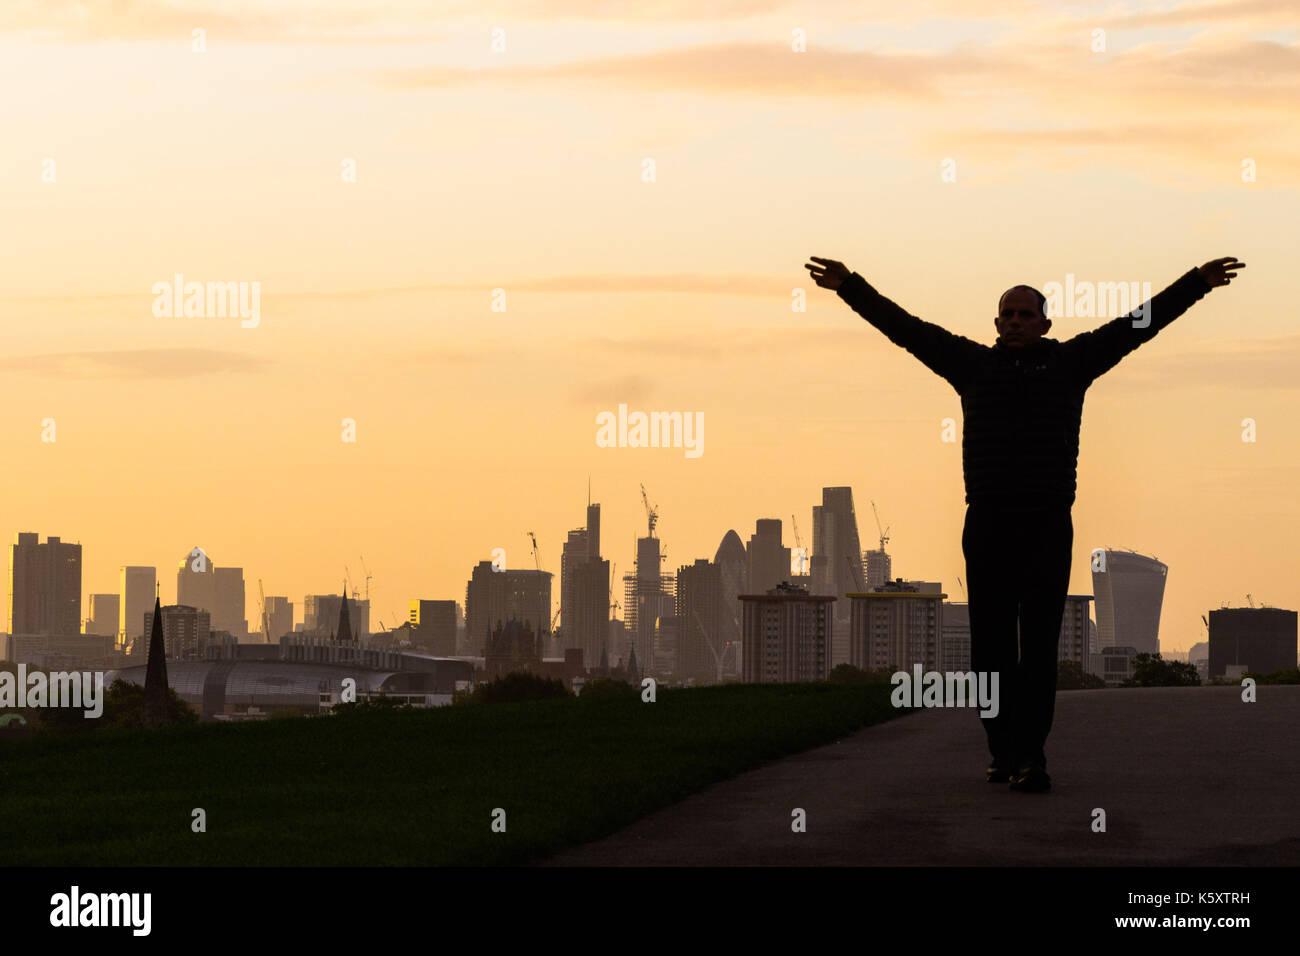 London, UK. 11th Sep, 2017. London, September 11 2017. A man exercises against the backdrop of the London skyline as a new day breaks over the city. Credit: Paul Davey/Alamy Live News Stock Photo